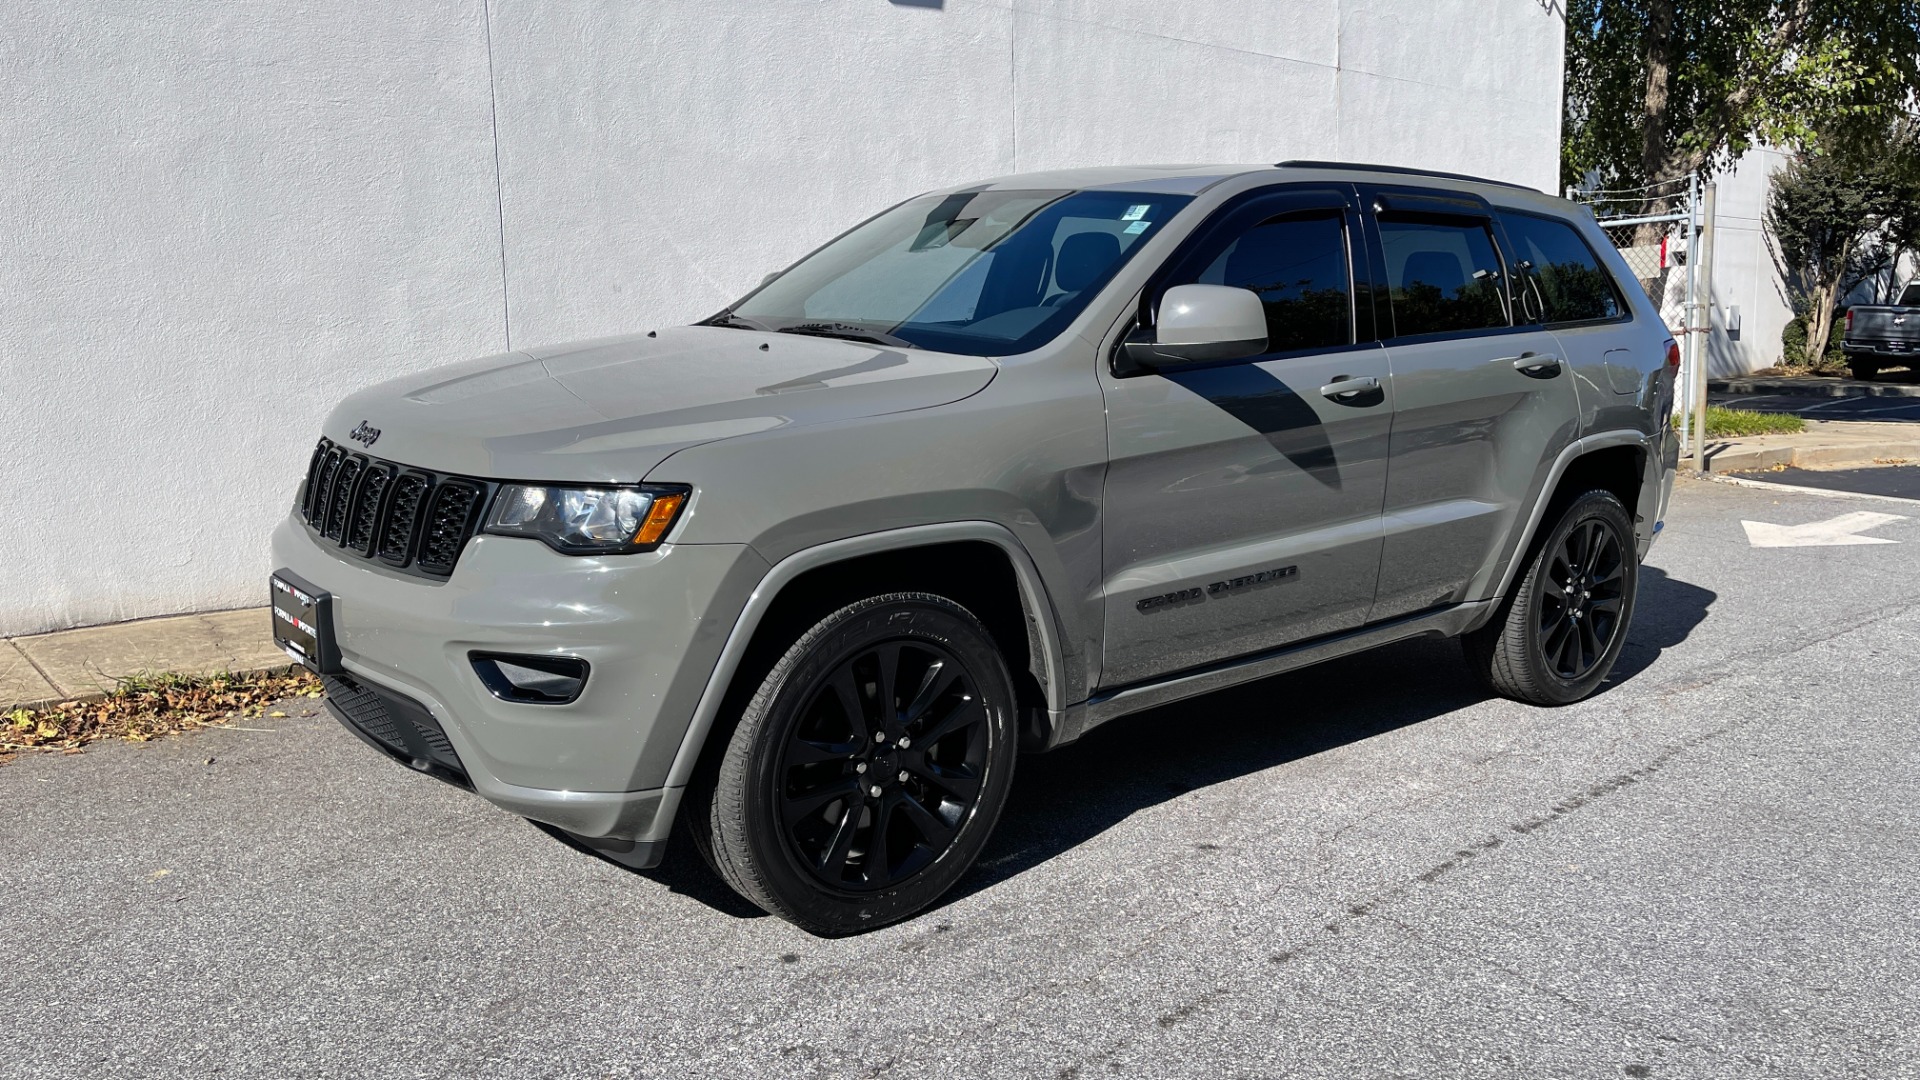 Used 2019 Jeep Grand Cherokee ALTITUDE / BLACK 20IN WHEELS / BLACK TRIM / SUNROOF / HEATED SEATS for sale Sold at Formula Imports in Charlotte NC 28227 6